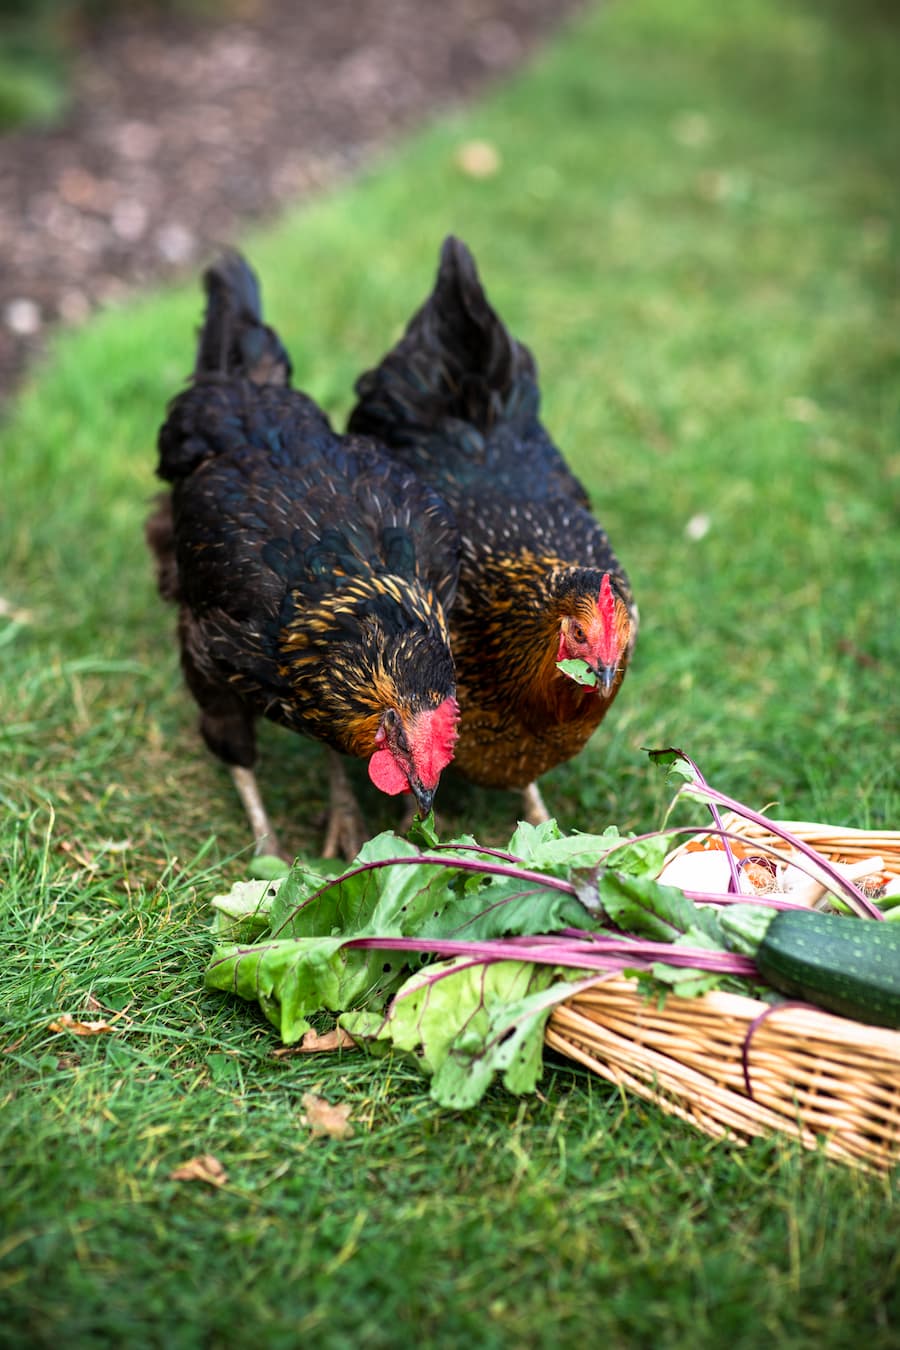 Two black hens eating from a basket of home-grown veggies